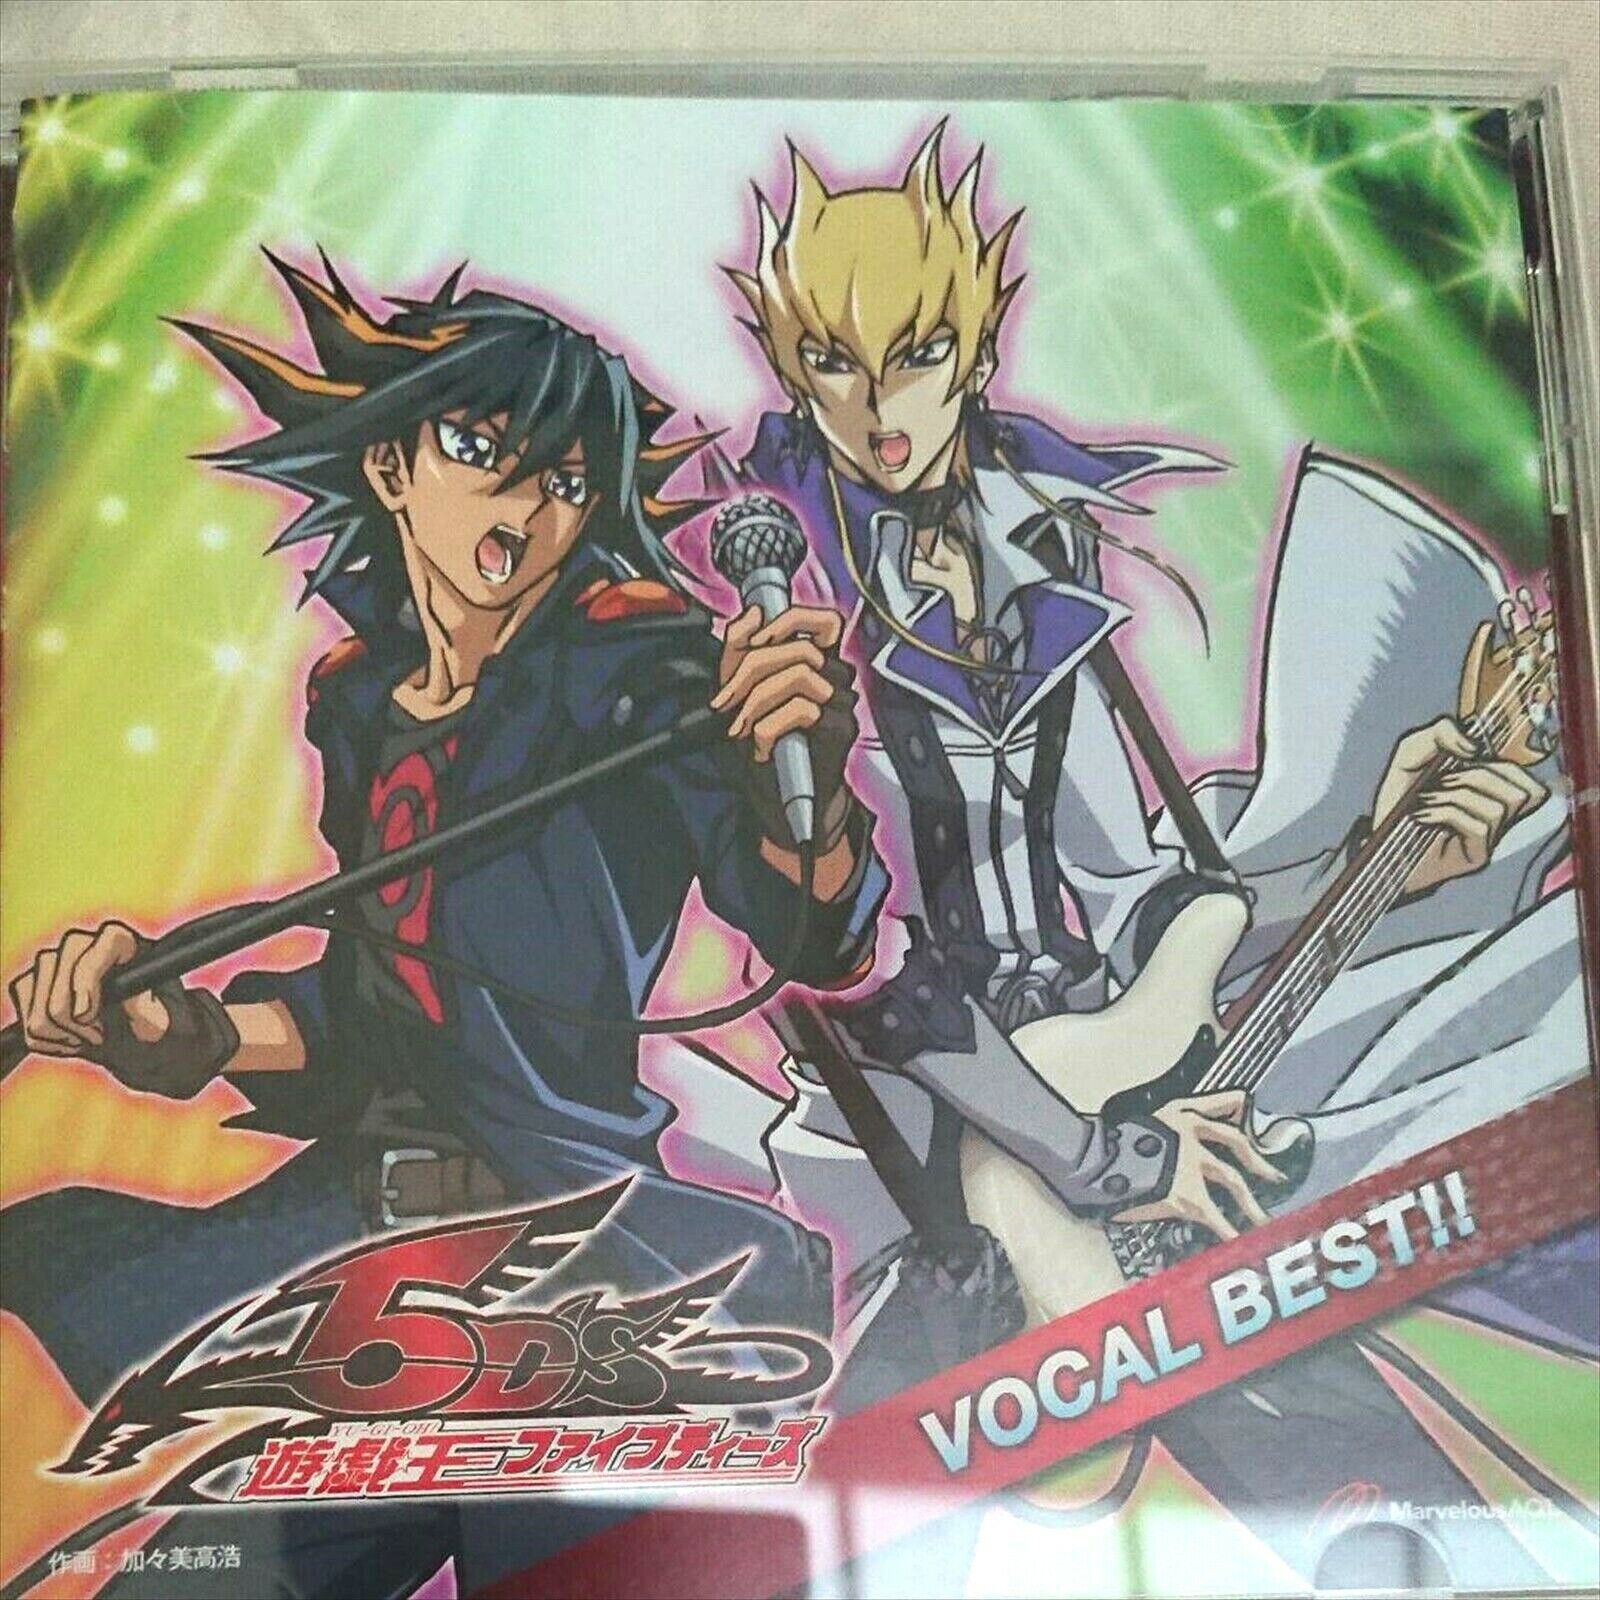 Used MJSA-1048 Animation Yu-Gi-Oh 5D\'s Vocal Best CD SMD Good Condition